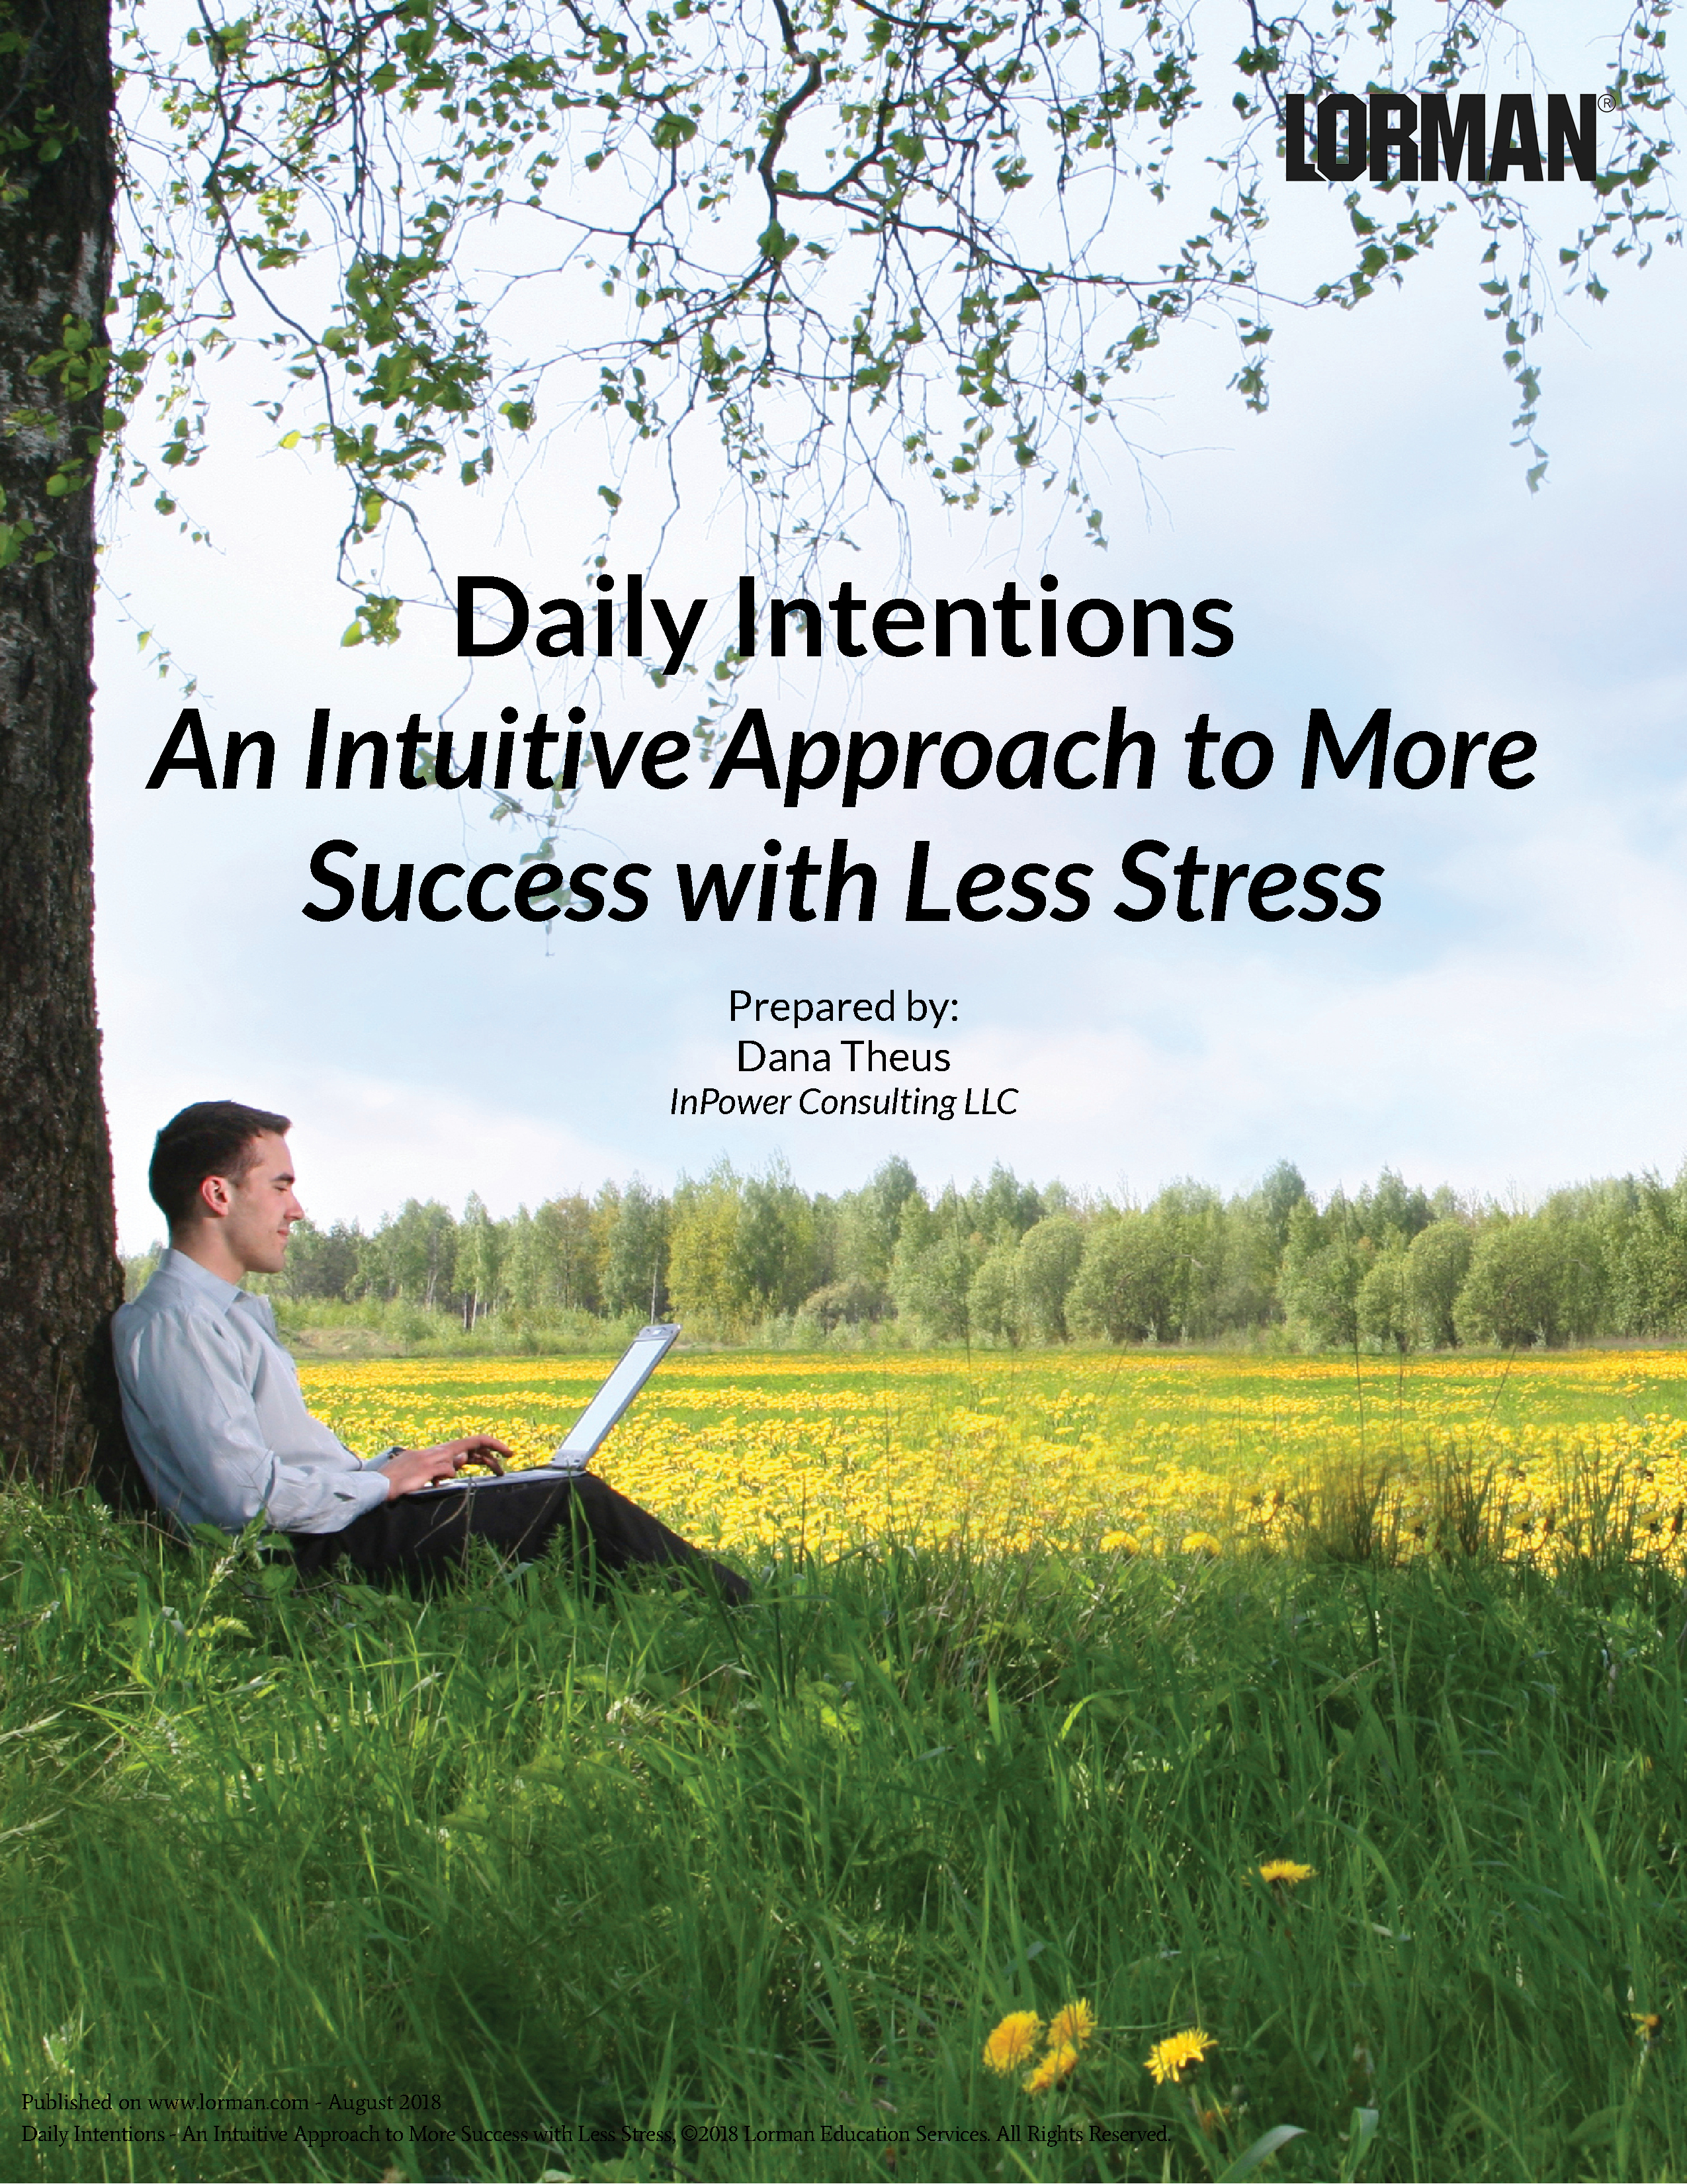 Daily Intentions - An Intuitive Approach to More Success with Less Stress